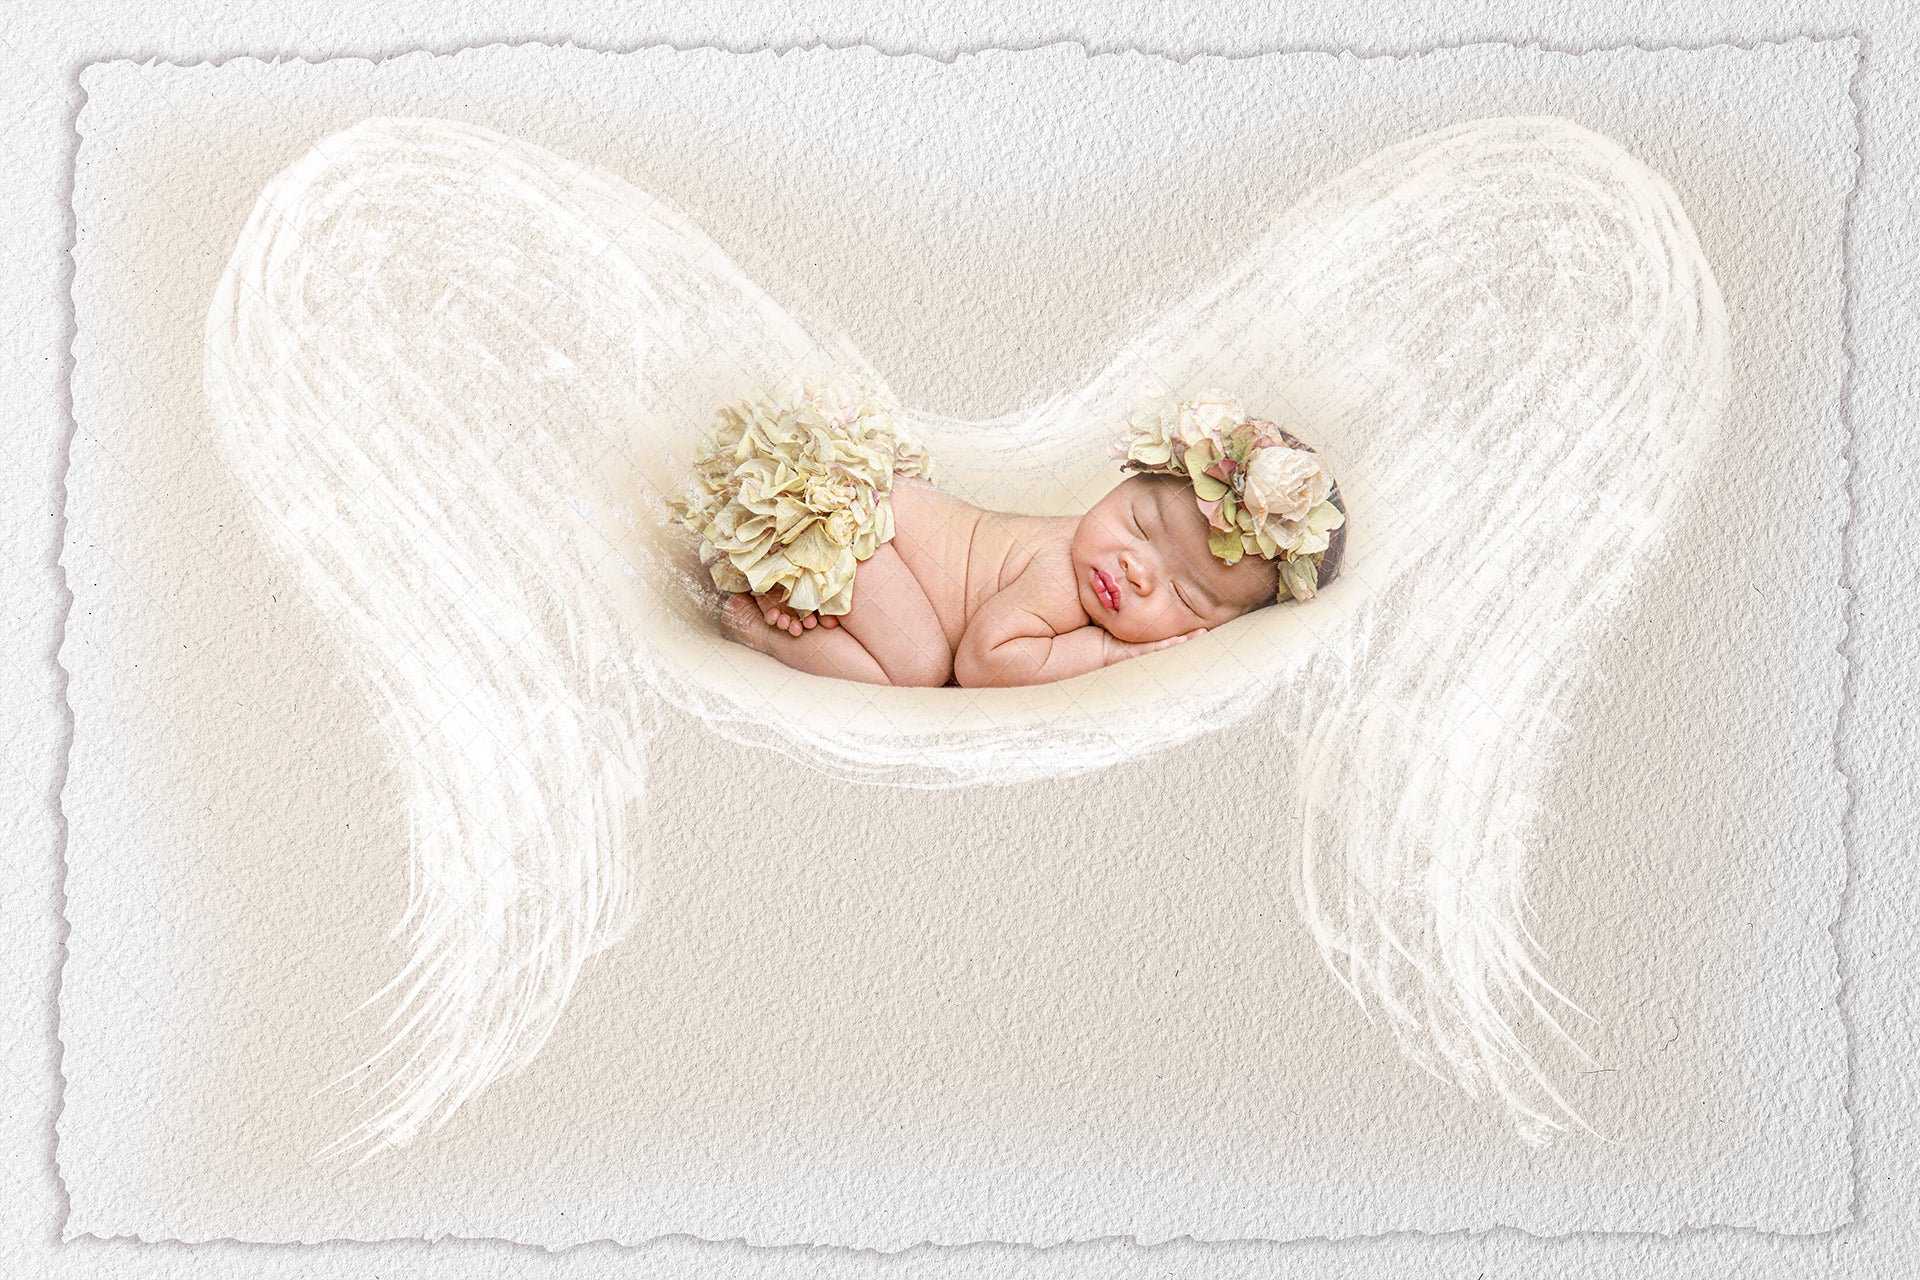 clipping masks  and textures Mom butterfly and angel wings